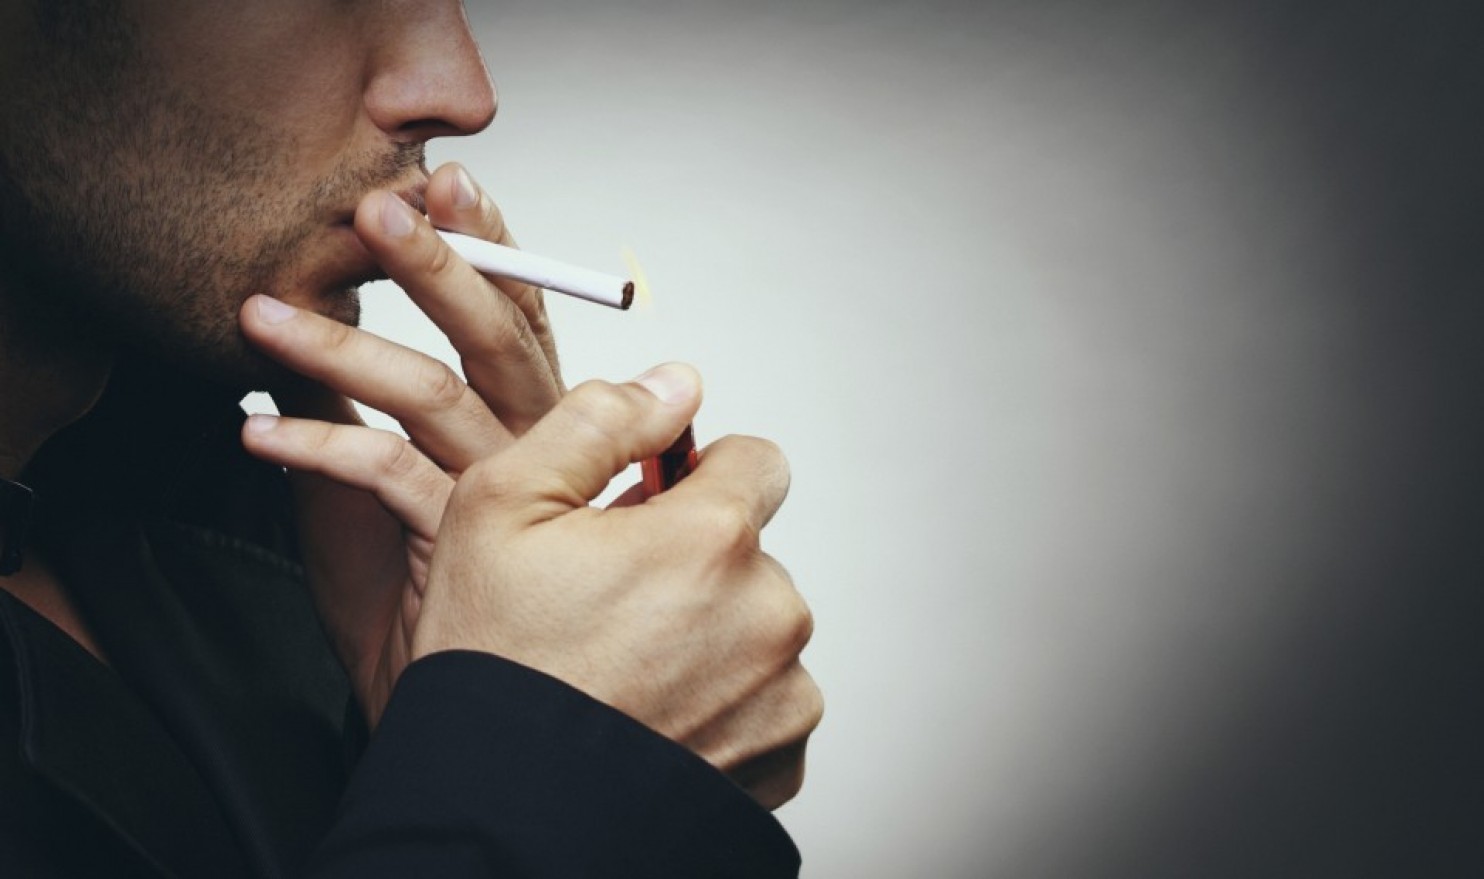 Tobacco leaders call for immediate action to curb smoking in the U.S.